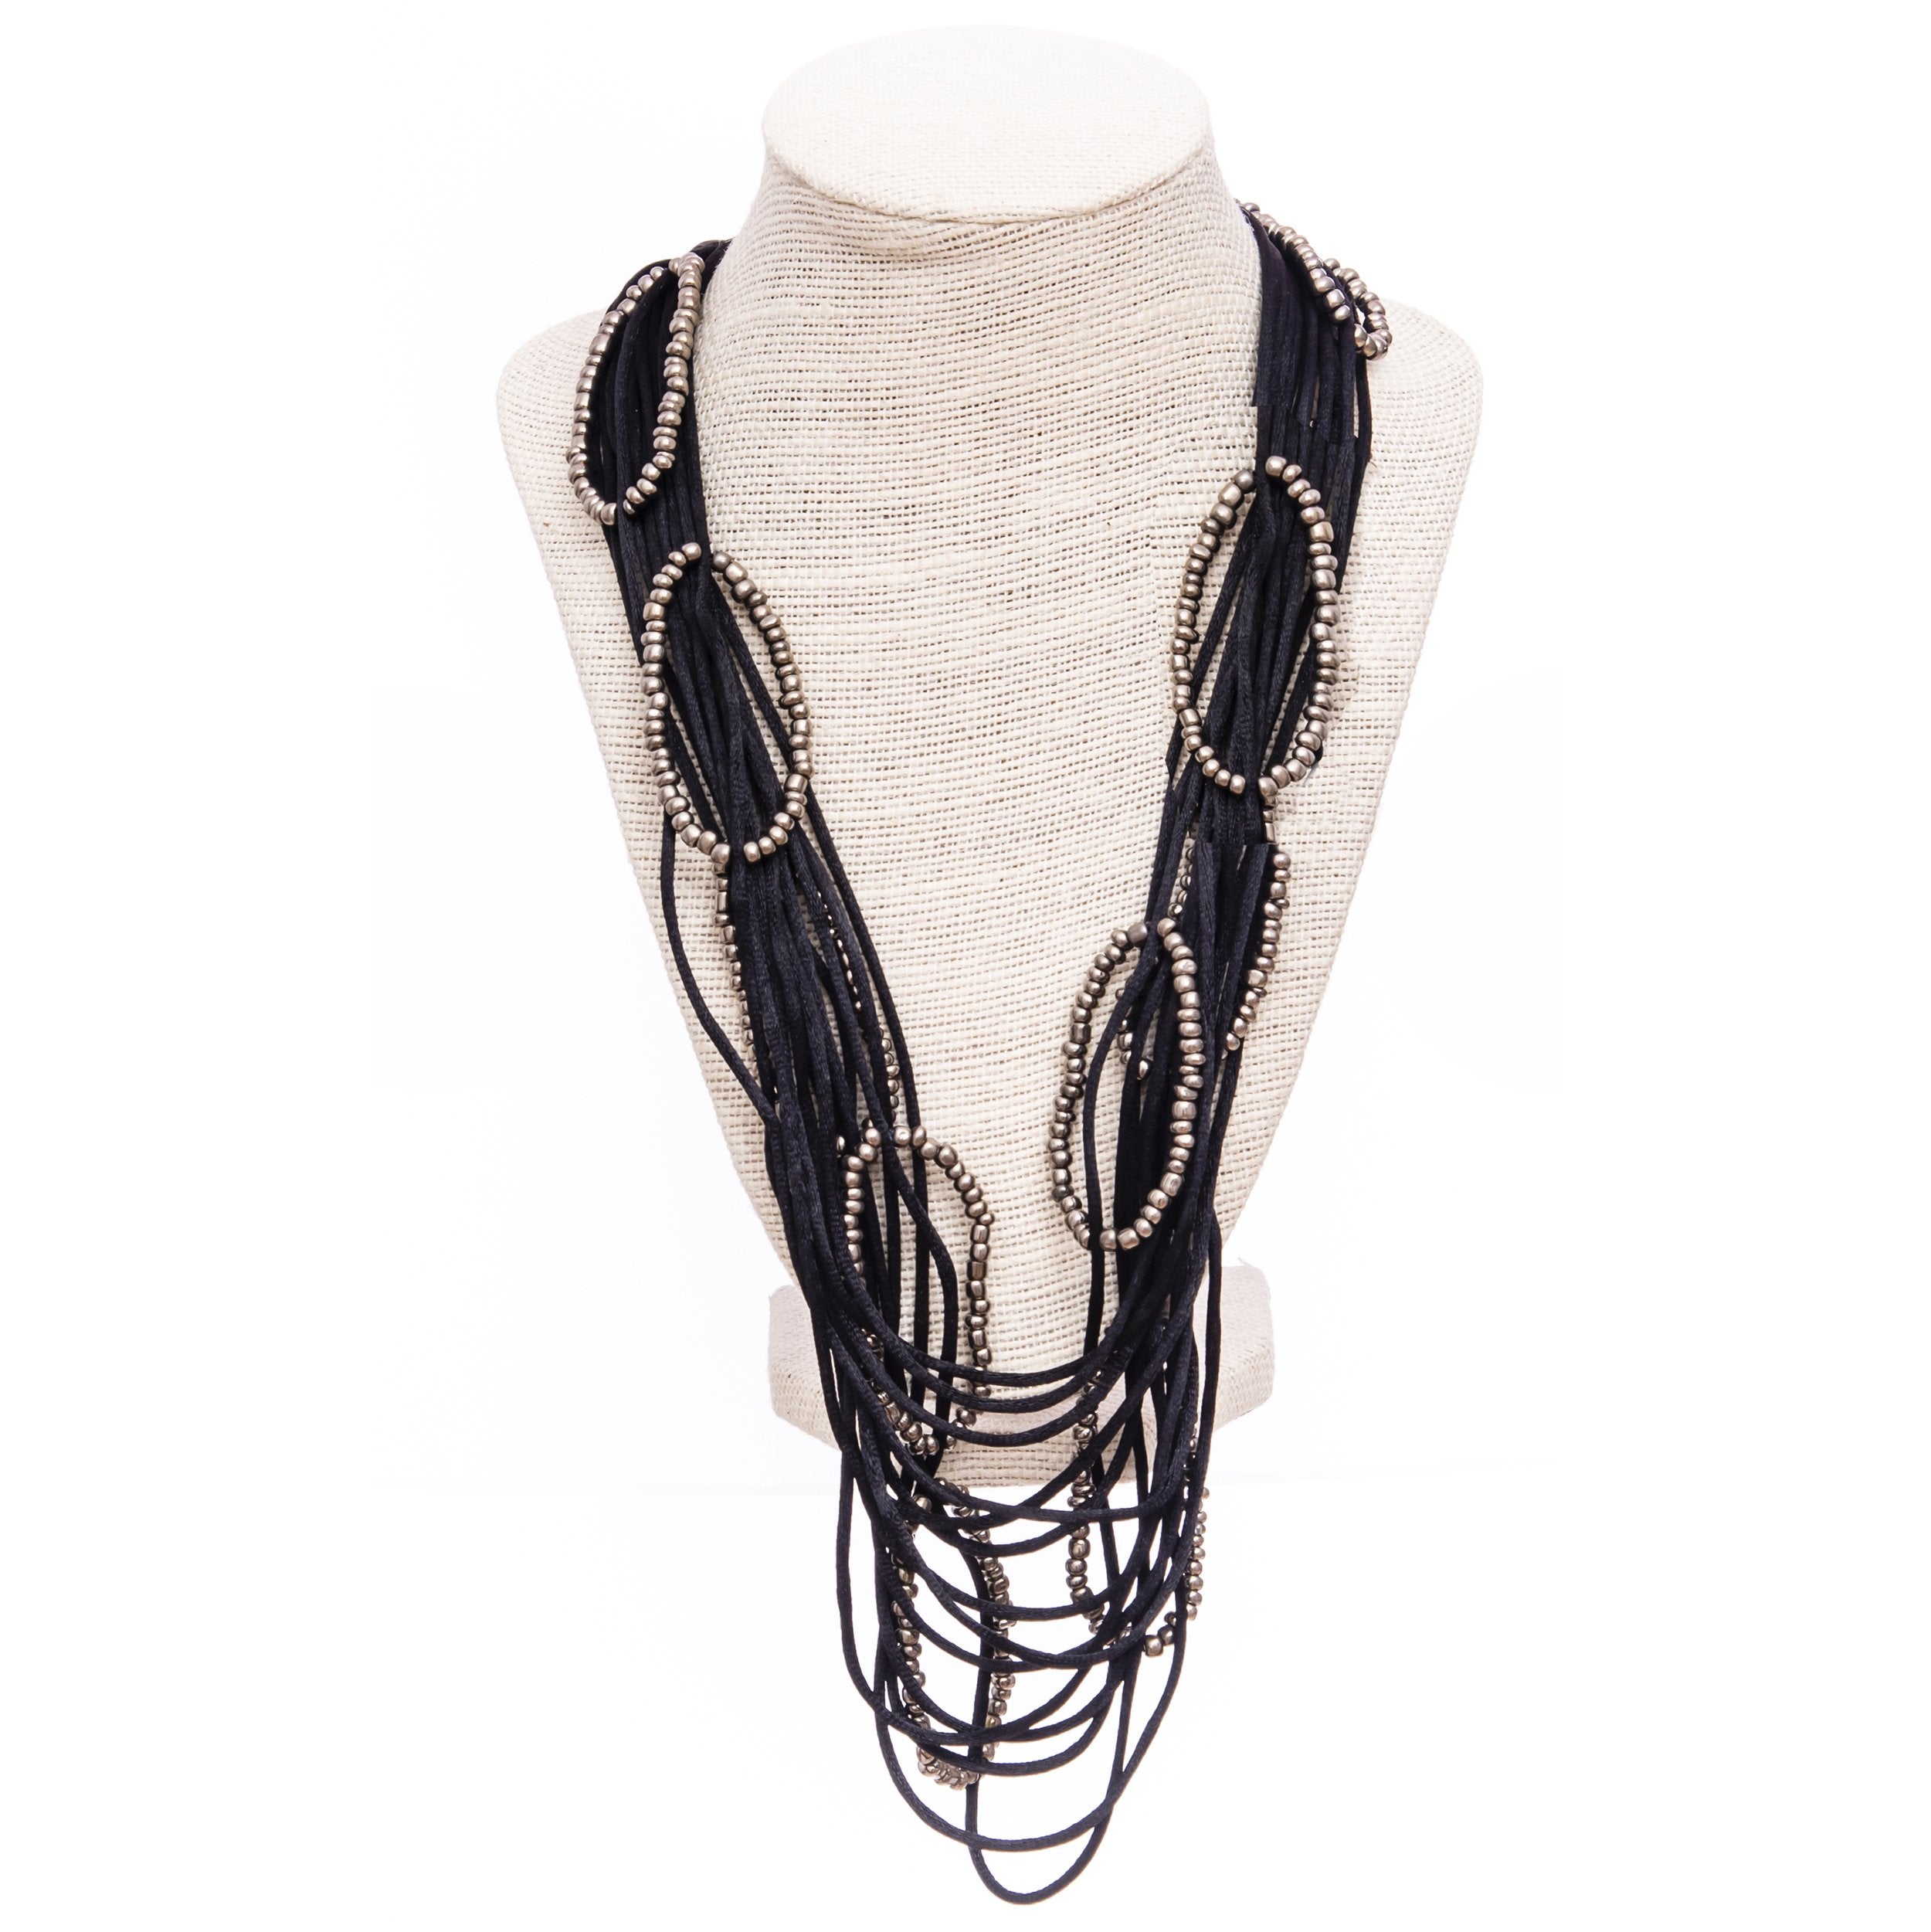 Okellas Multi-Strand Long Necklace With Silver Oval Beads Black And Silver